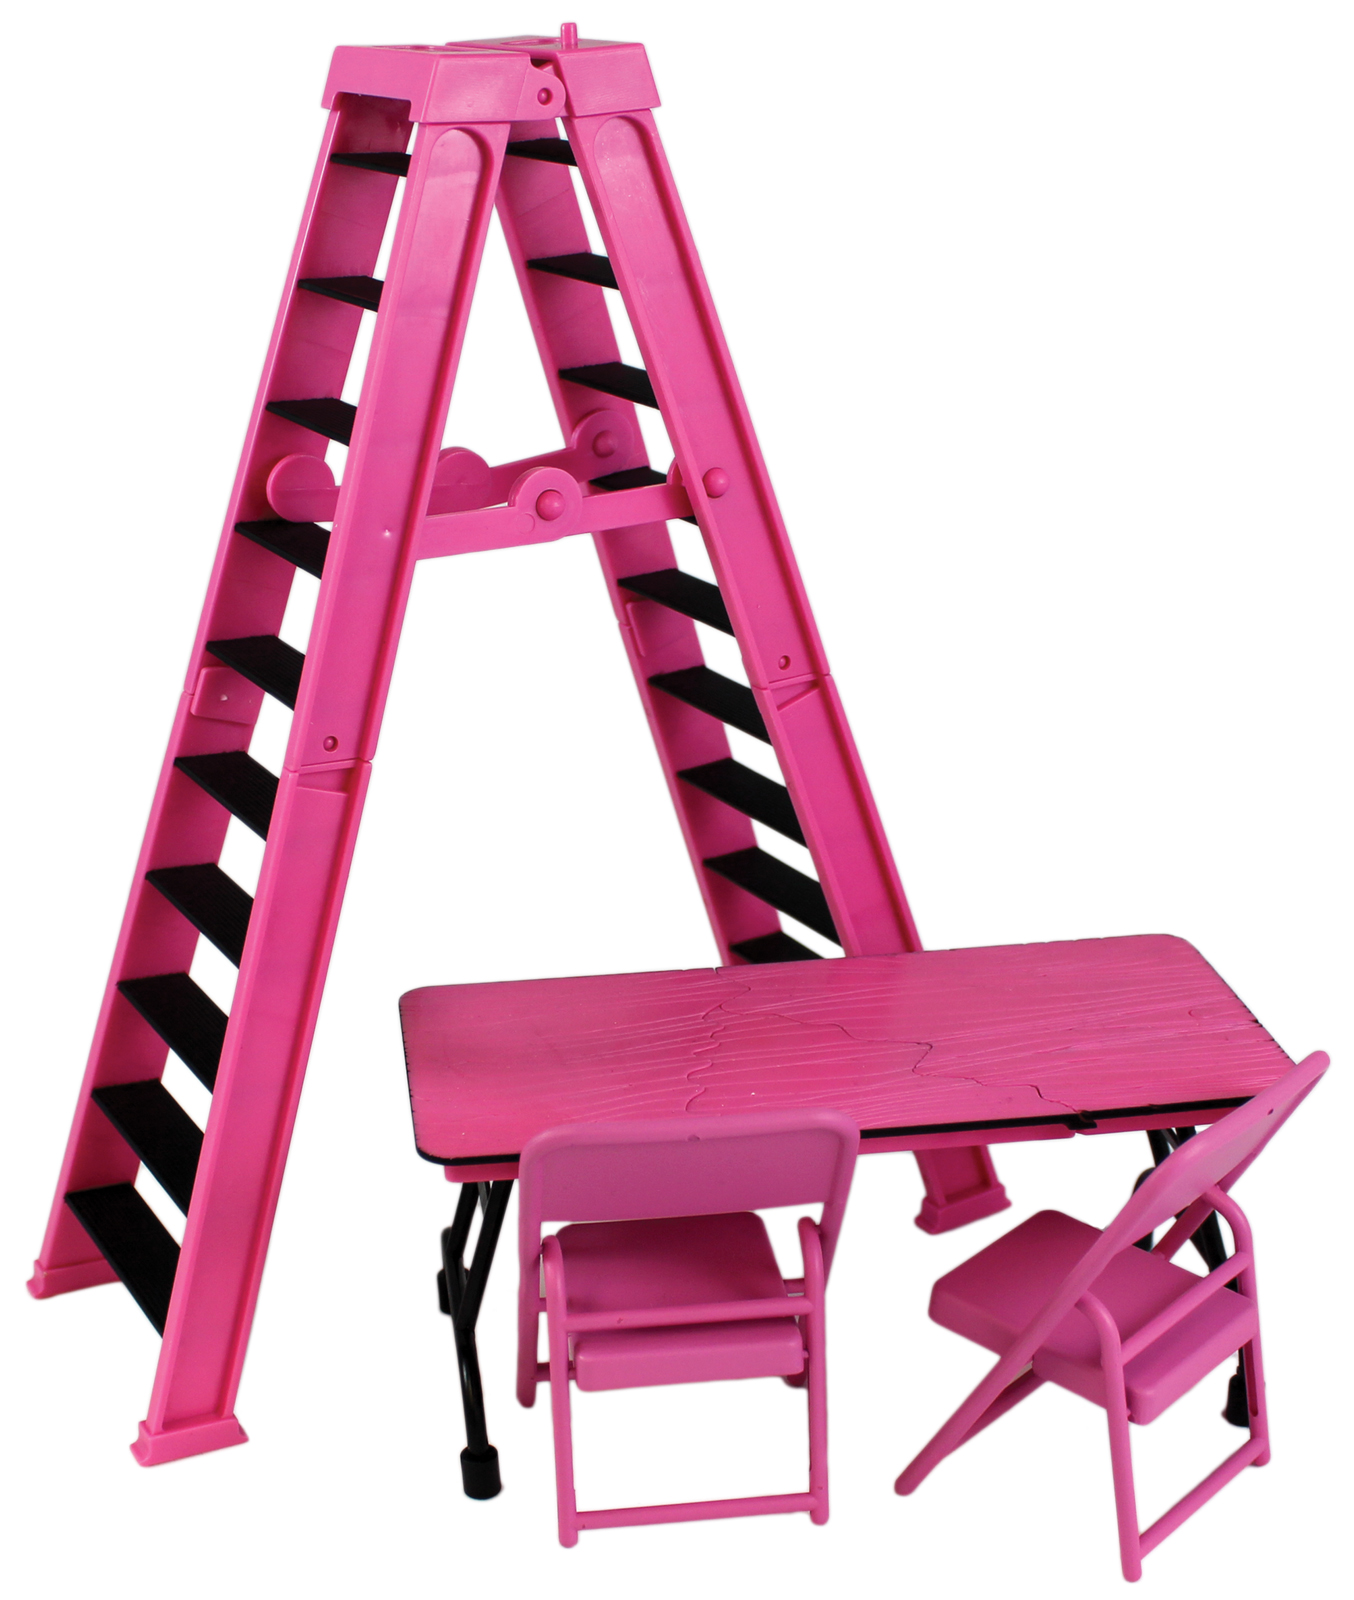 0002910130150 - ULTIMATE LADDER & TABLE PLAYSET (PINK) - RINGSIDE EXCLUSIVE TOY WRESTLING ACTION FIGURE ACCESSORIES PACK